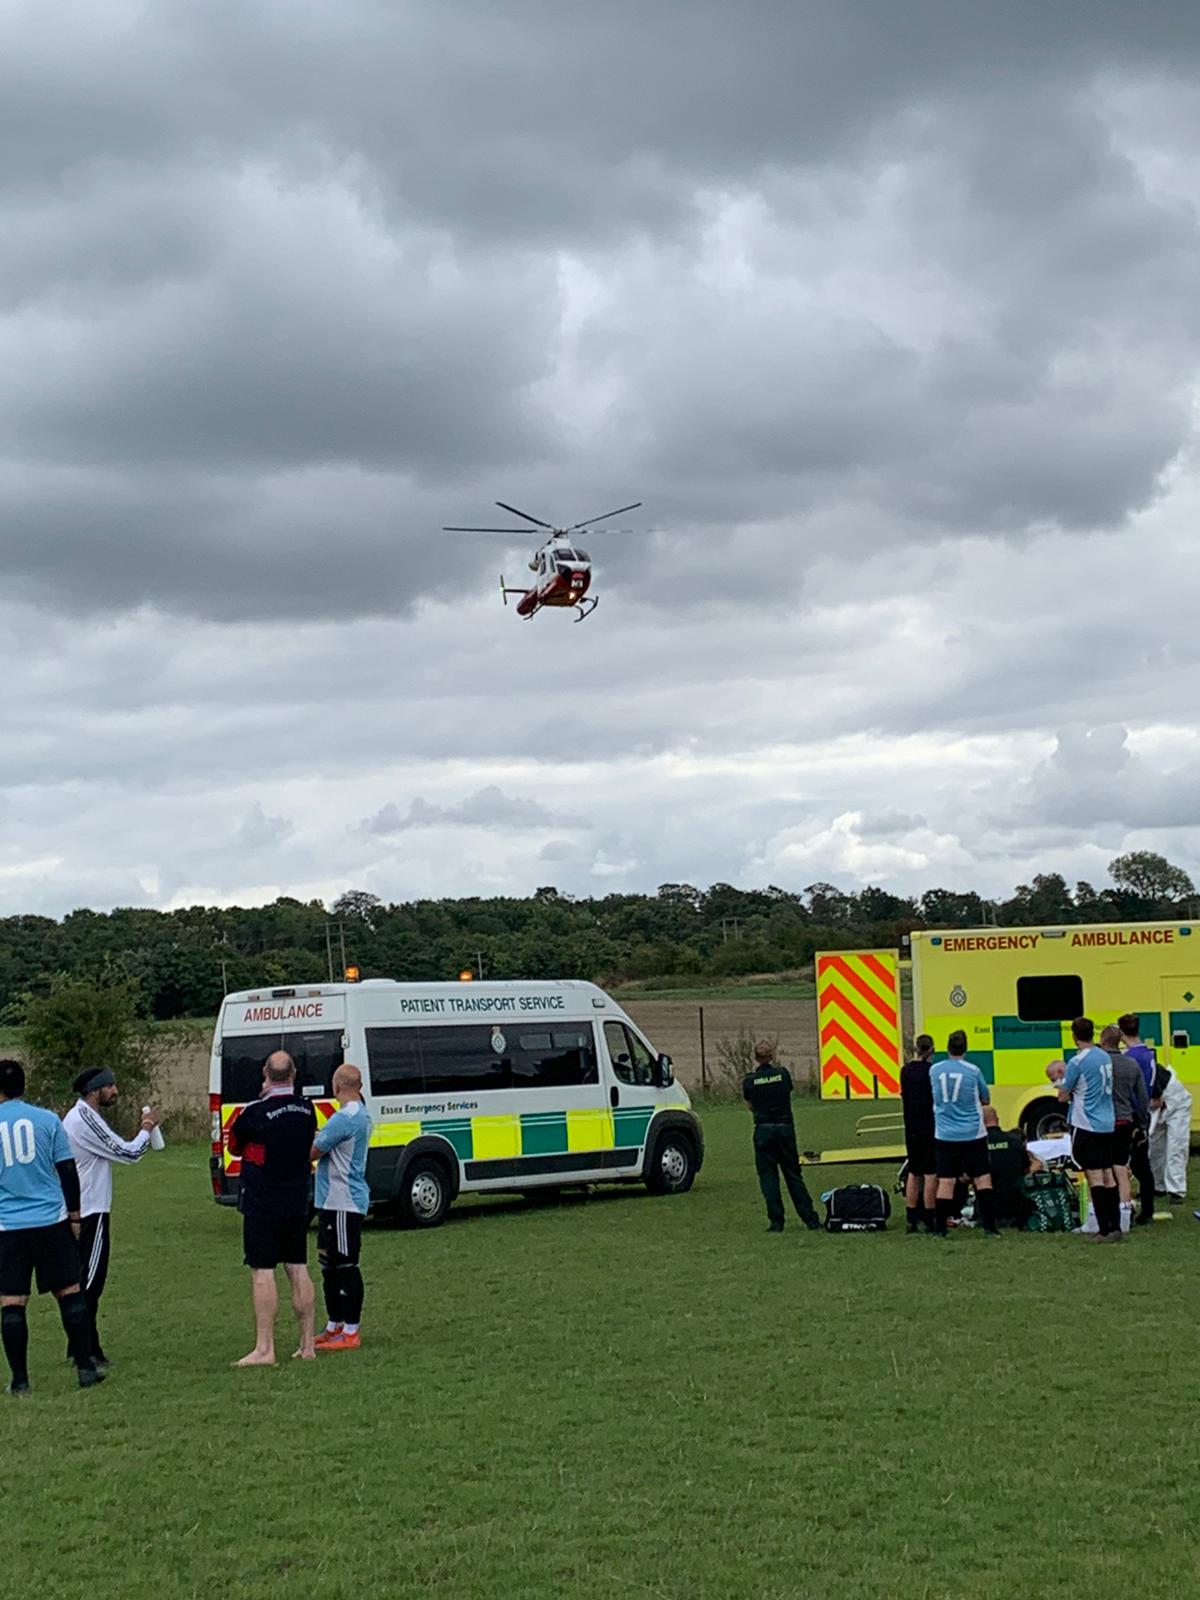 A helicopter arrives at the football pitch after a Sunday League footballer suffered a cardiac arrest